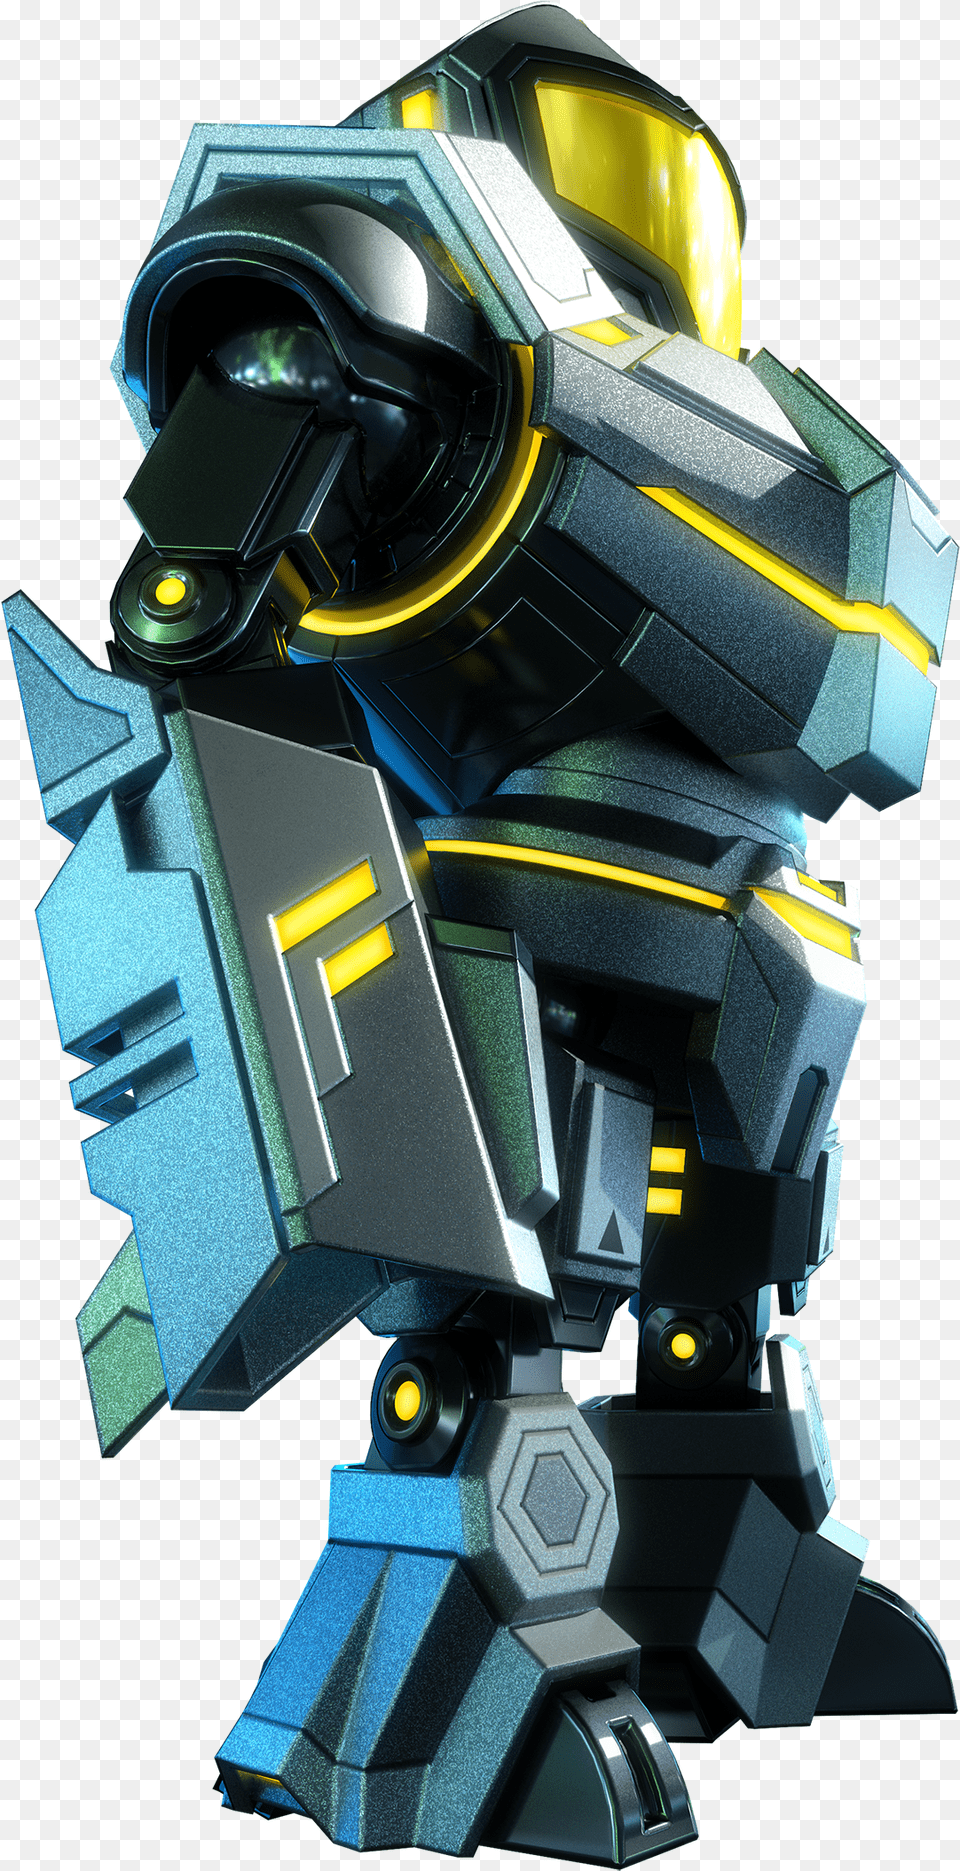 Us Play Upcoming Nintendo Games Metroid Prime Federation Force Yellow Mech, Robot, Toy Free Png Download